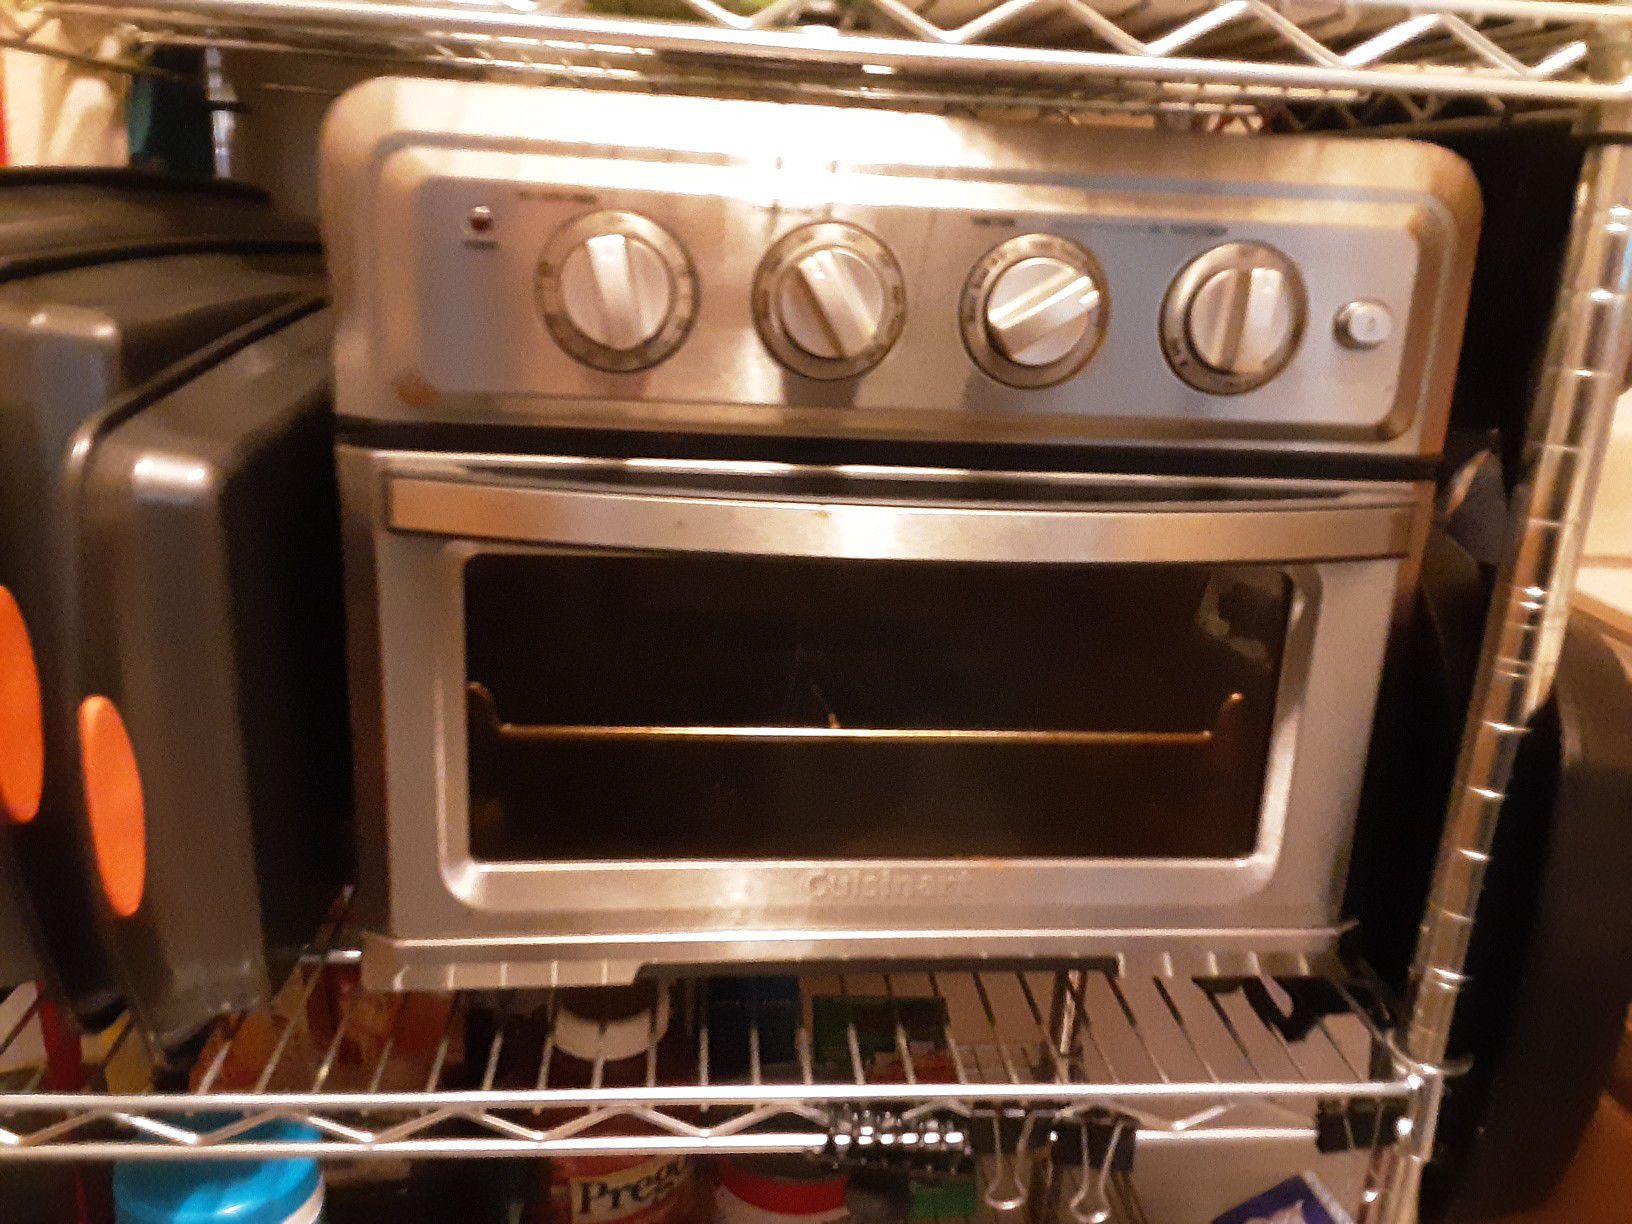 Cuisinart convection oven, air dryer combo